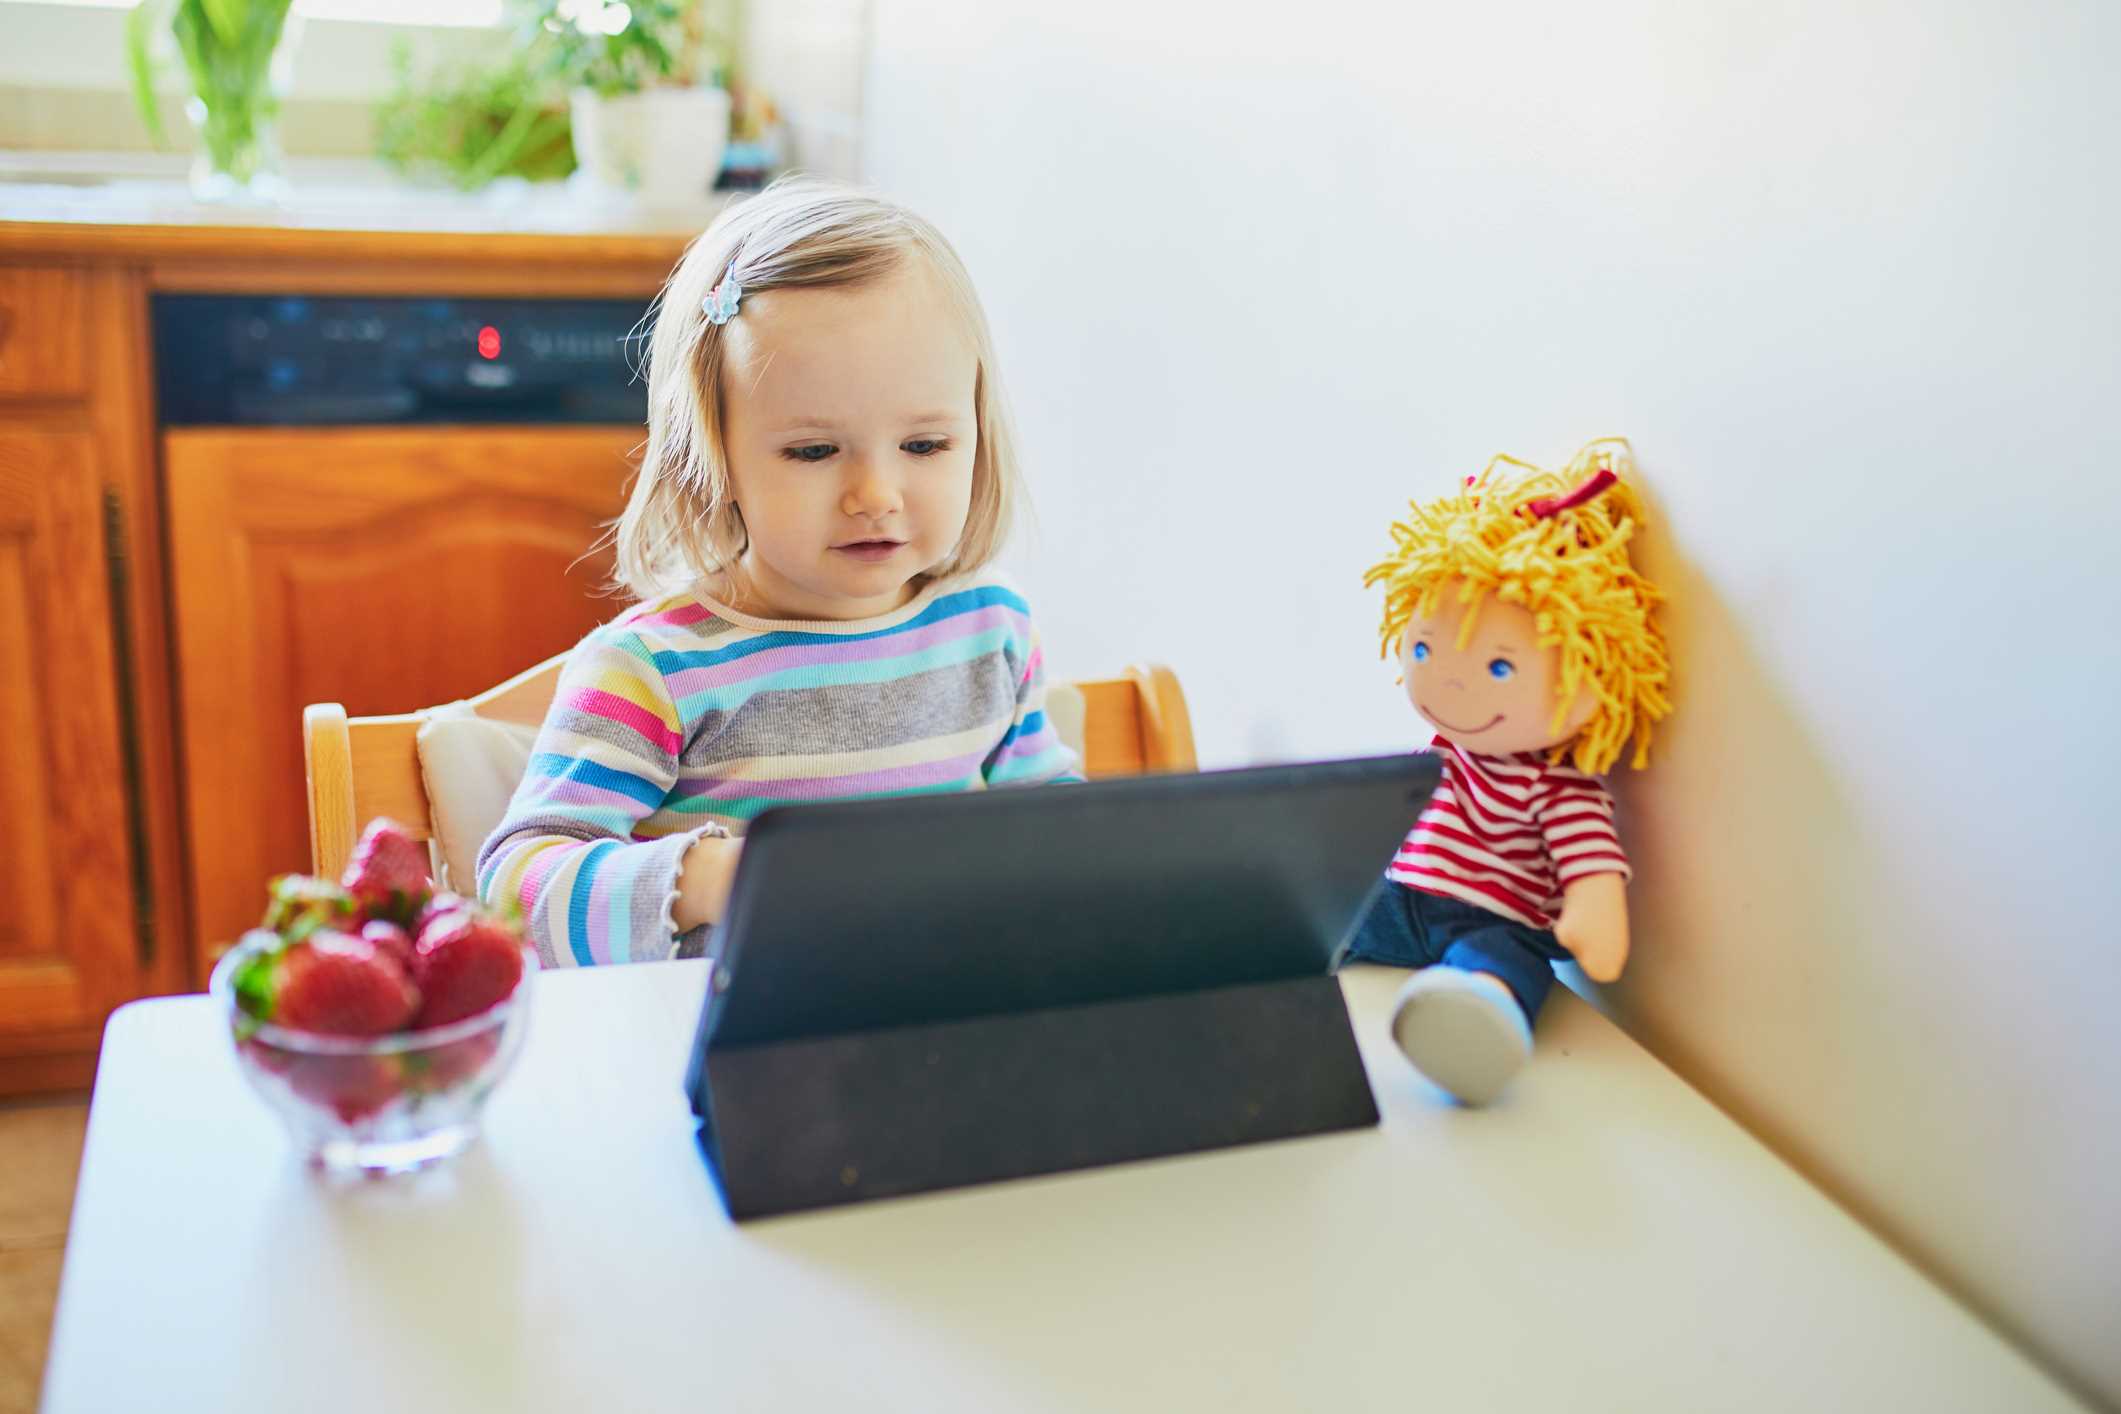 A small little girl looking at a tablet computer screen as she sits at a small table in a home kitchen. A bowl of strawberries and a rag doll are also on the table.